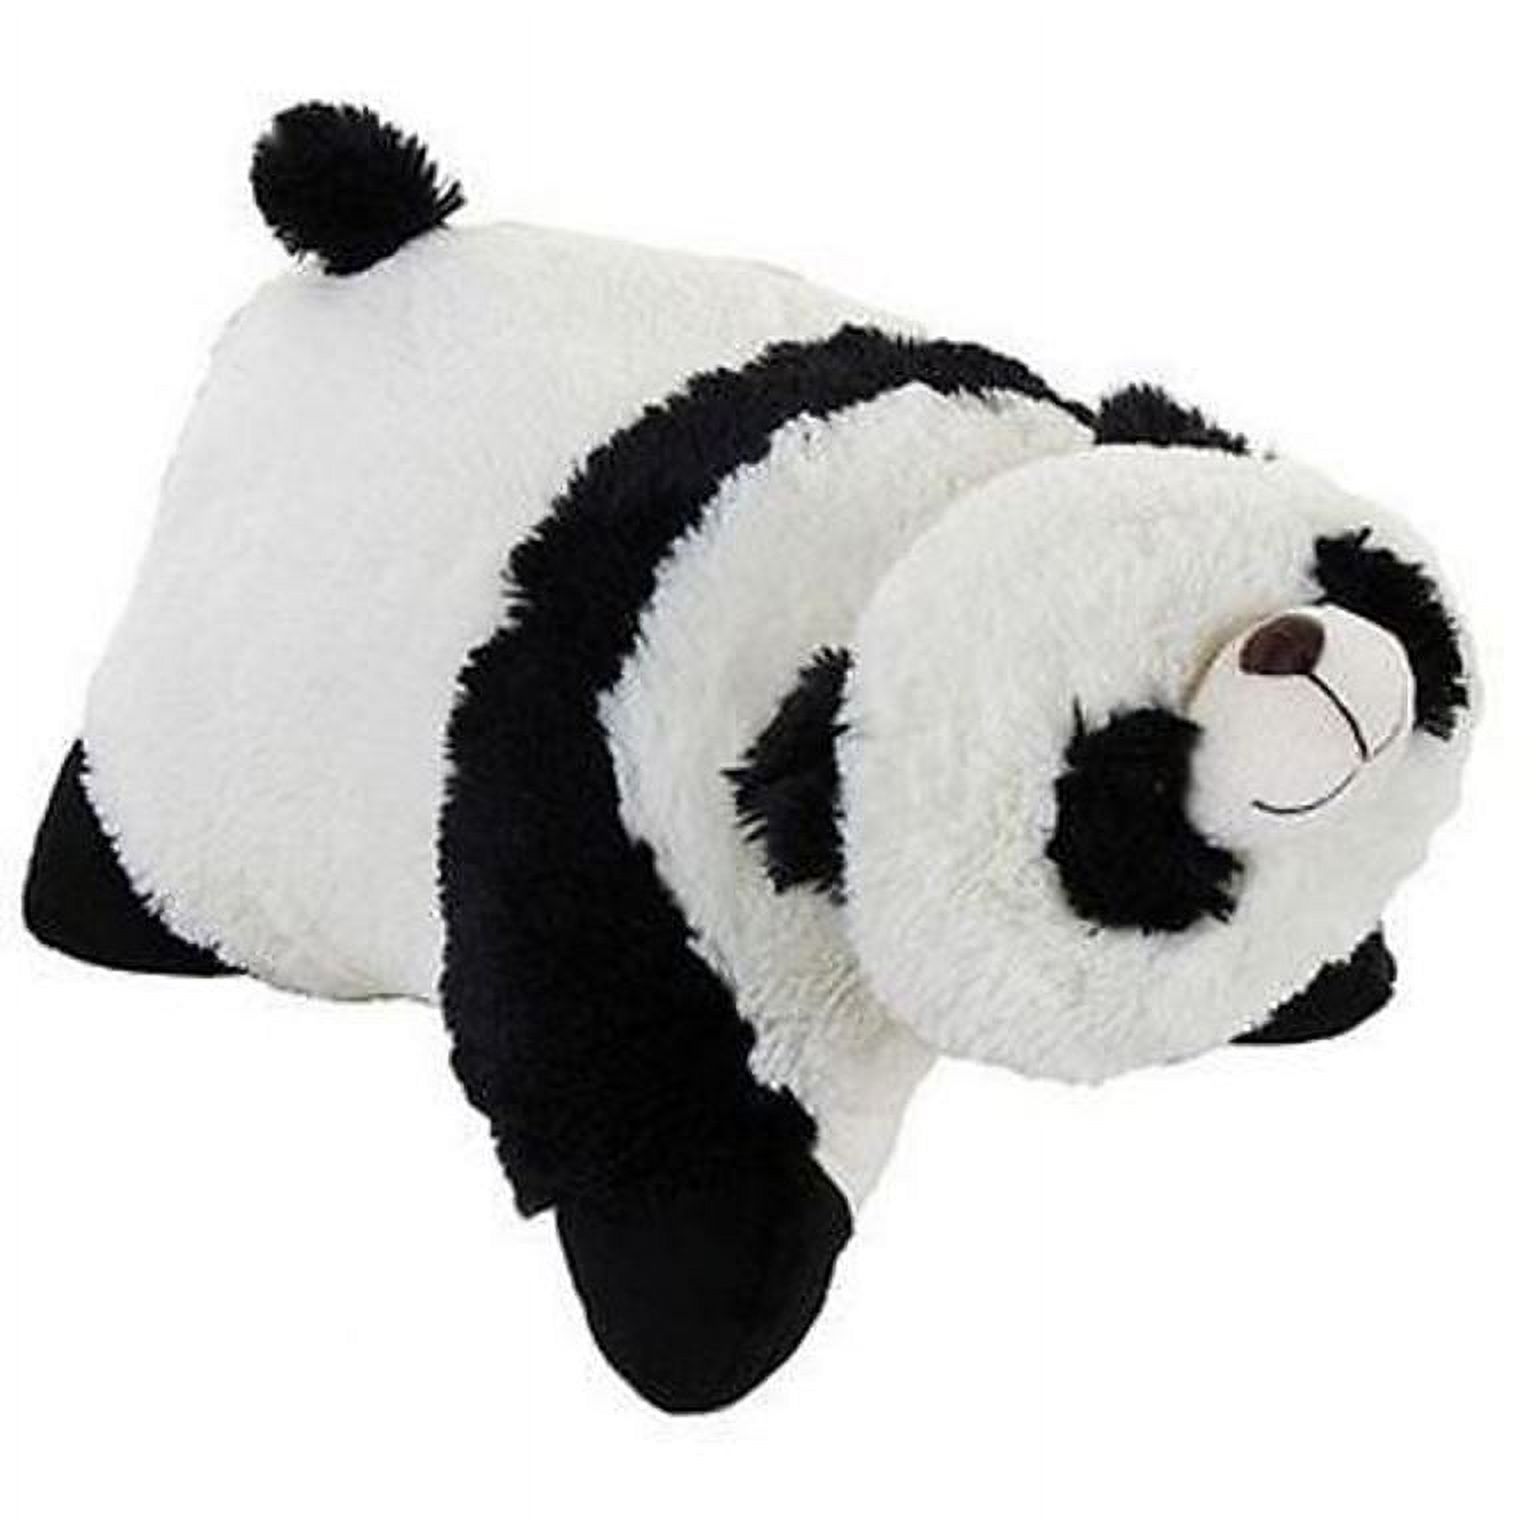 Genuine My Pillow Pet Comfy Panda - Large 18" Black and White - NEW - image 1 of 2